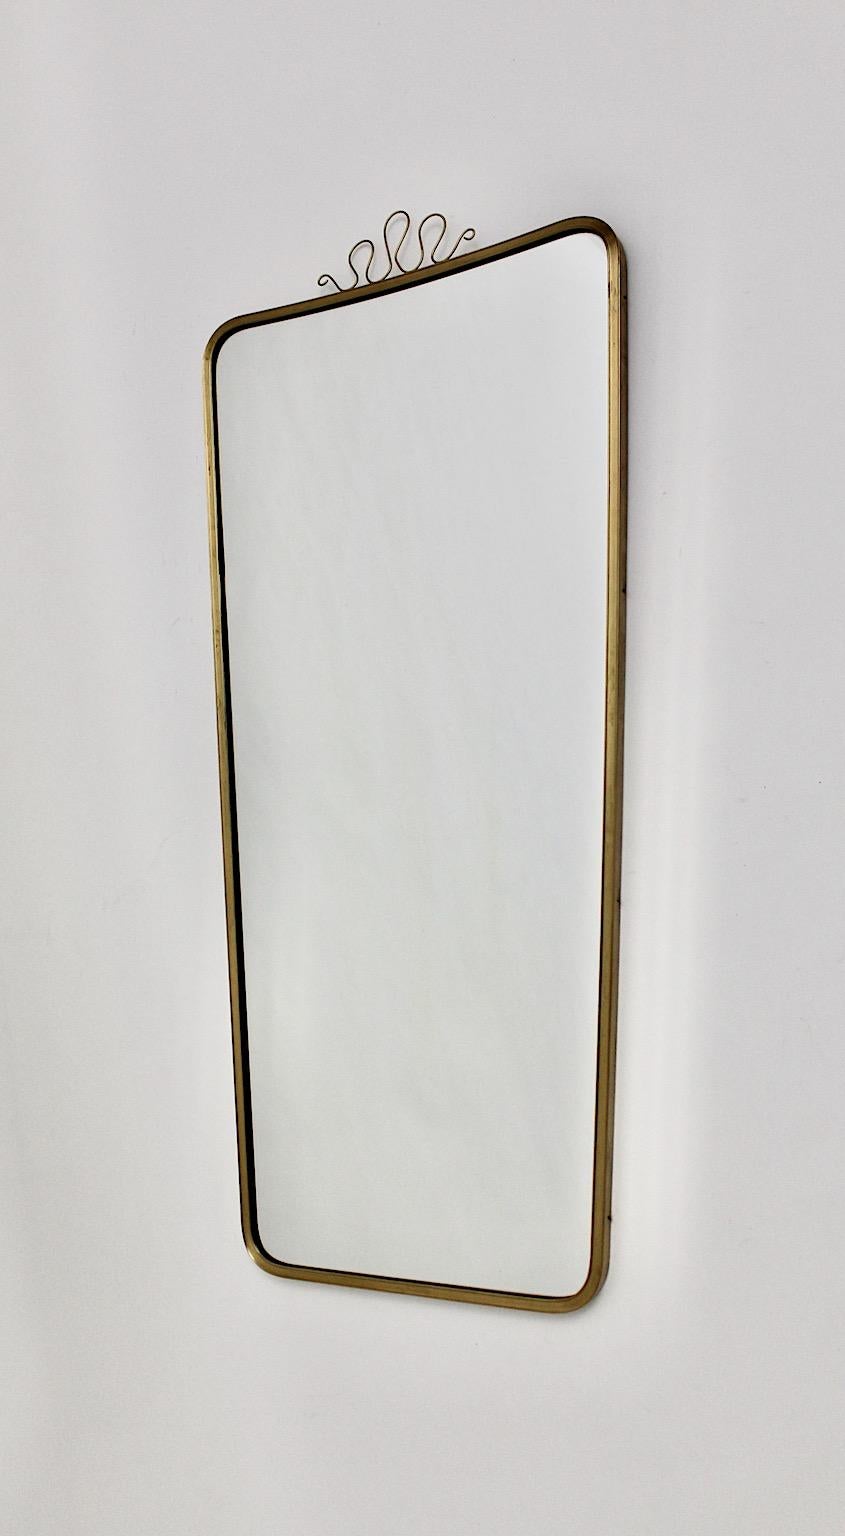 Mid Century Modern Vintage full length floor mirror or wall mirror from brass and mirror glass Italy 1950s.
A stunning new arrival, a full length floor mirror with a profile frame from brass with cute loops at the top.
At the backside the mirror